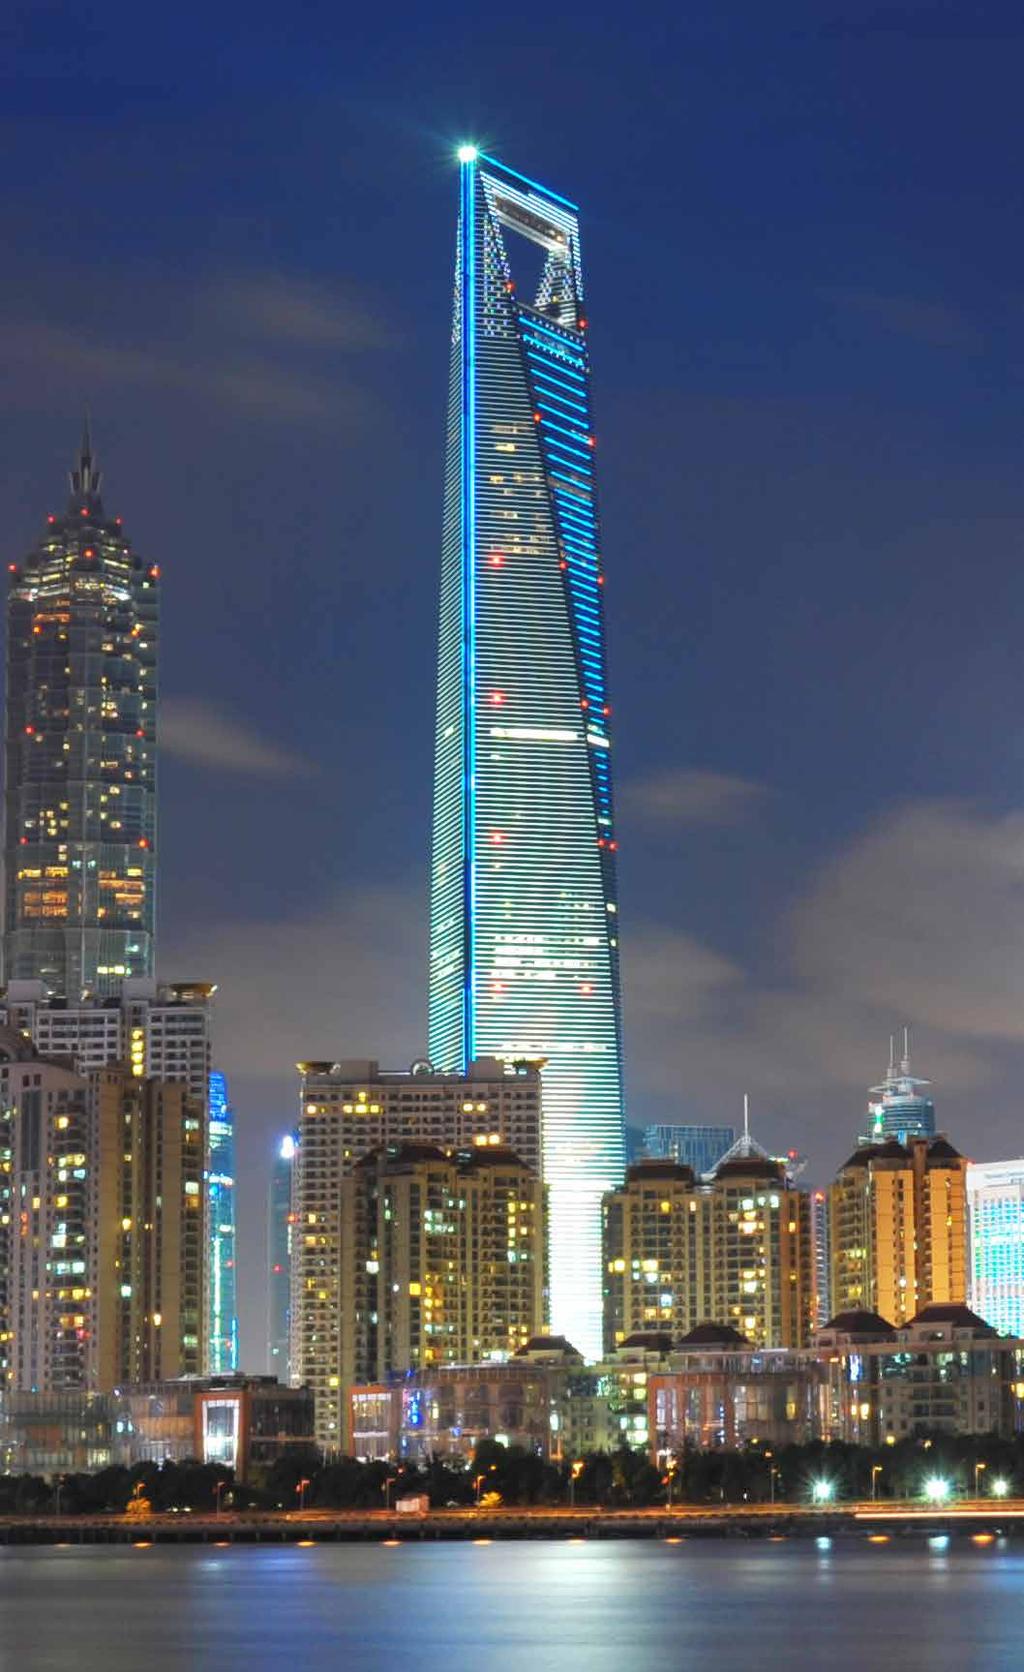 Shanghai World Financial Center Shanghai Tower Given the task of creating a building that would symbolize Shanghai s emergence as a global capital, the architect, William Pedersen, chose to make a